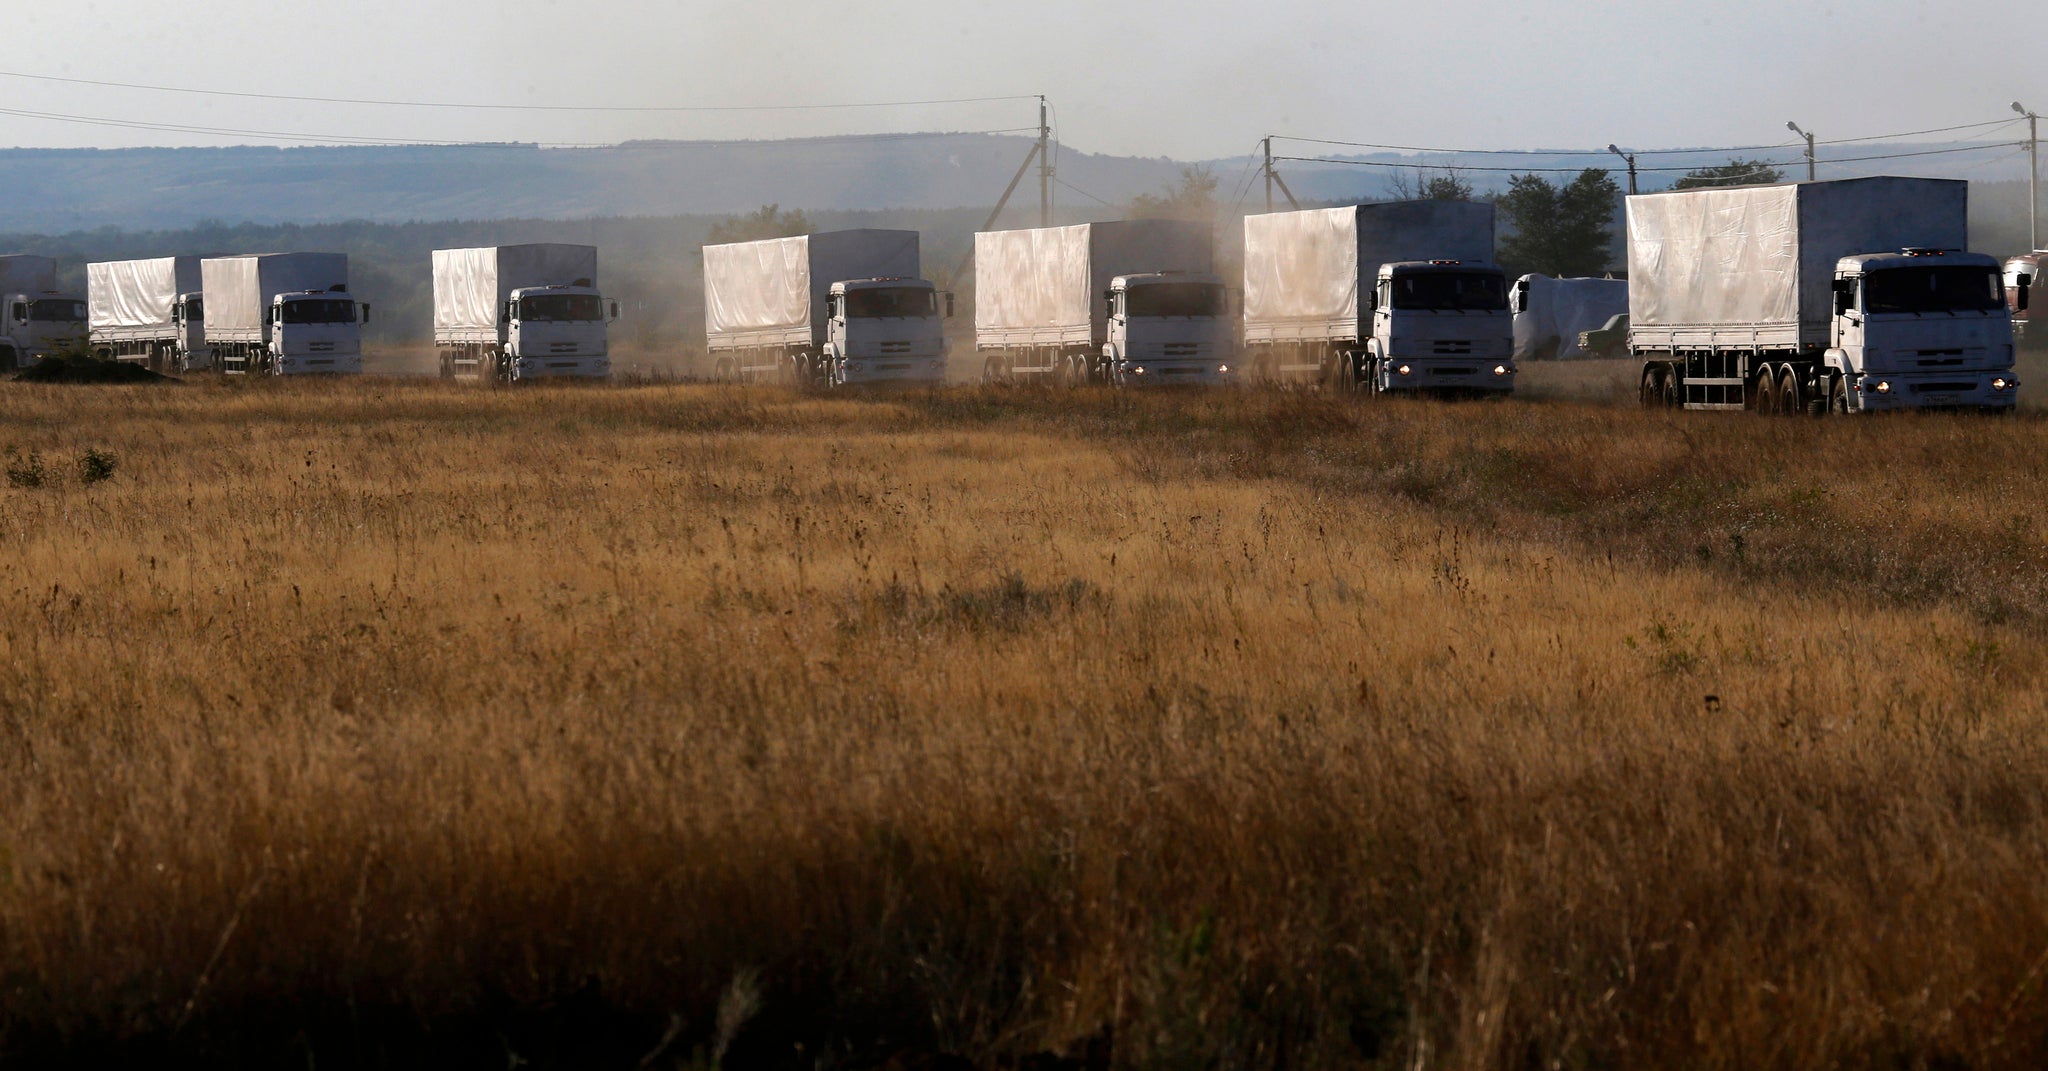 The convoy before it parked at a camp near Donetsk yesterday